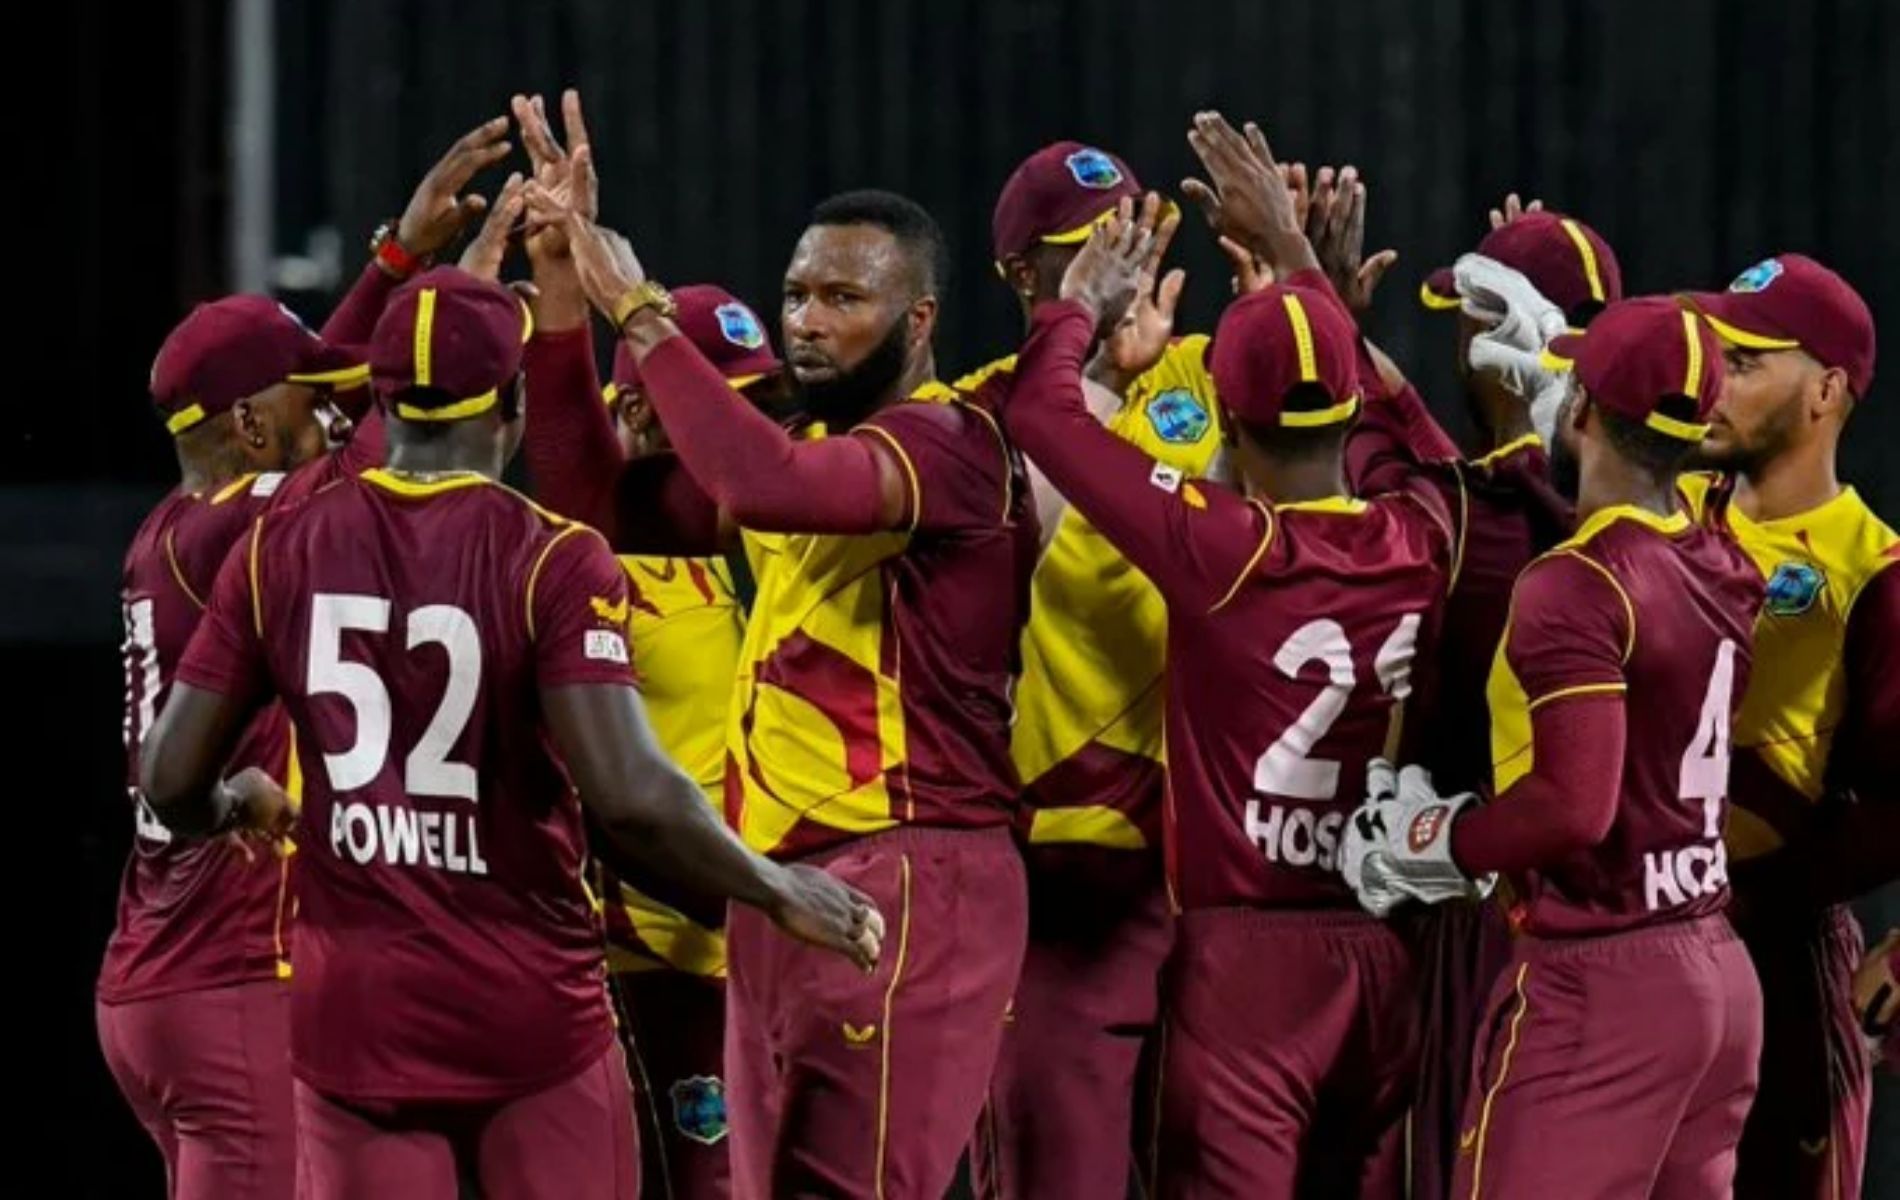 Kieron Pollard looked at the positives for West Indies despite a disappointing tour of India.